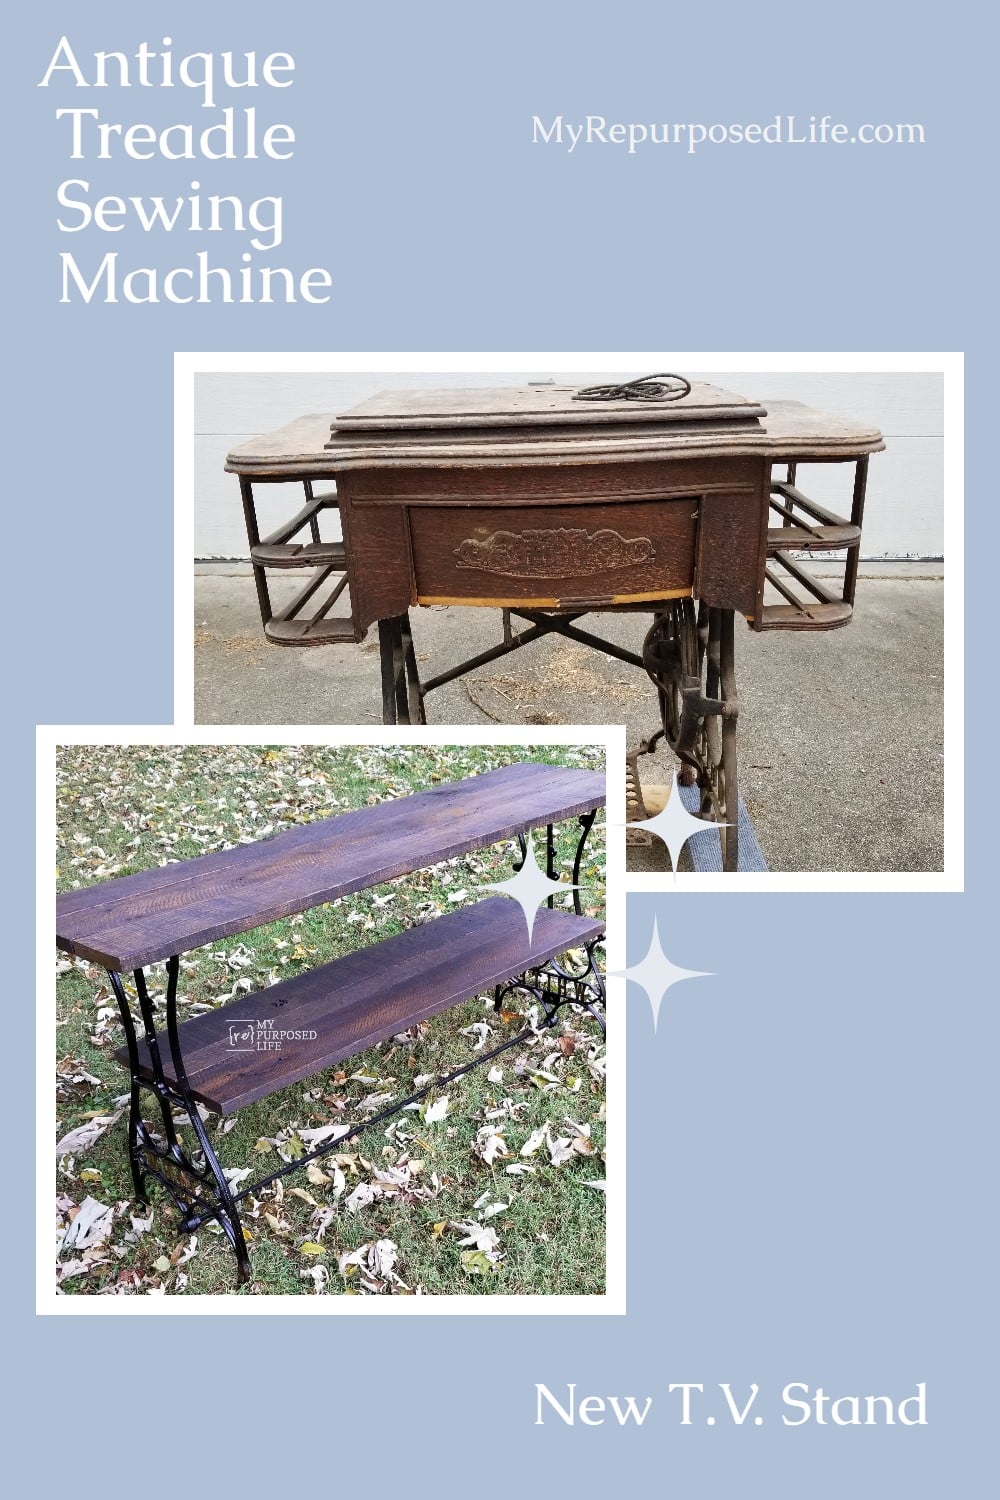 Using reclaimed pallet wood and the chassis of an antique sewing machine, I made an over sized t.v. table. A friend needed a table to hold a huge flat screen t.v. #MyRepurposedLife #repurposed #furniture #tv #table via @repurposedlife